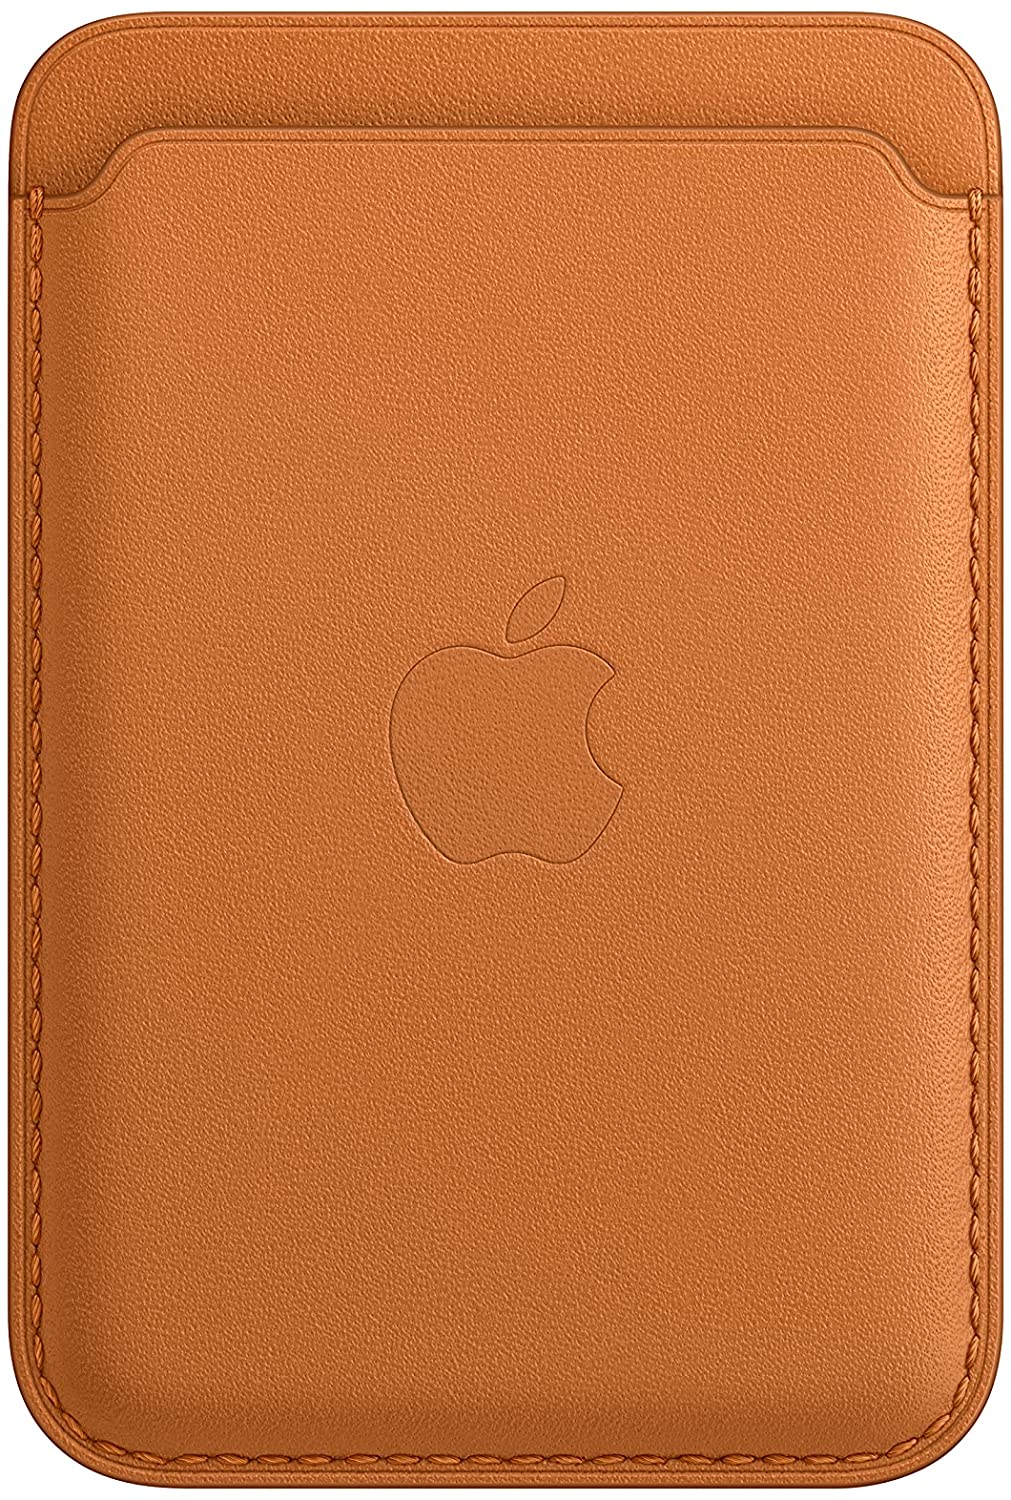 Apple iPhone Leather Wallet with MagSafe (2021) MM0Q3ZM/A - Golden Brown (Refurbished)